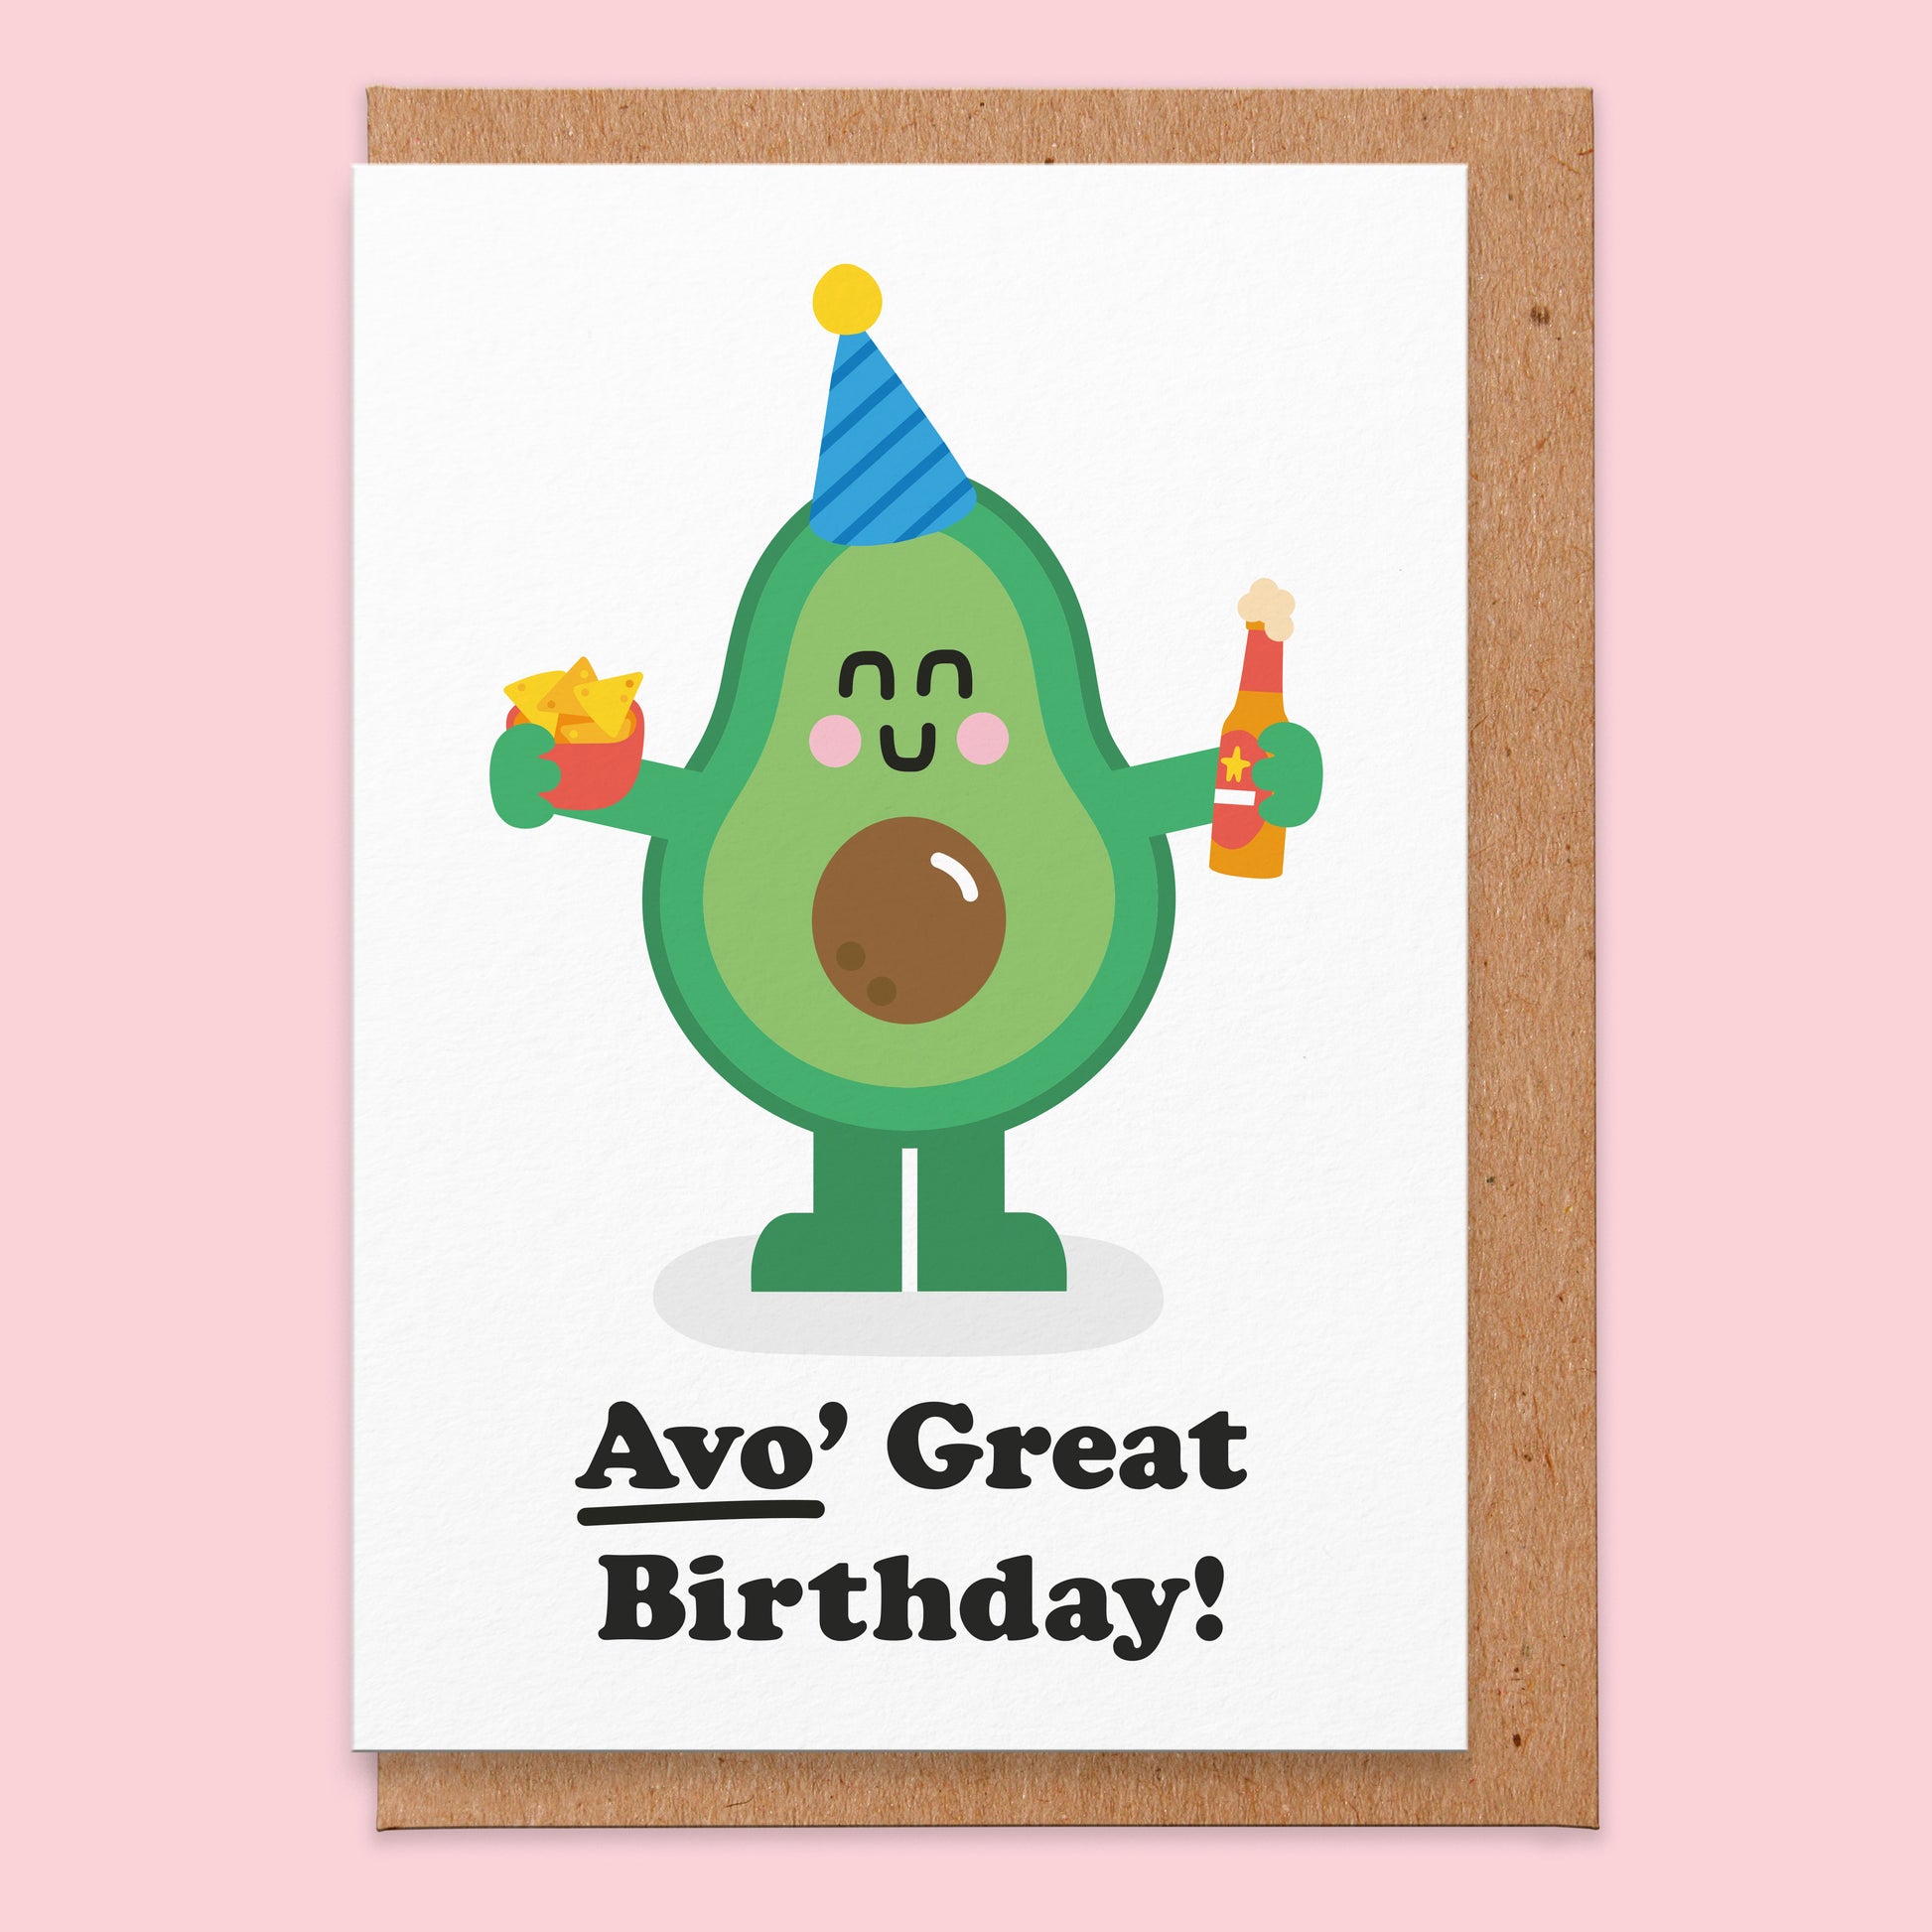 Birthday card that reads avo' great birthday and has an illustration of an avocado holding a beer and some tortilla chips and has a party hat on.